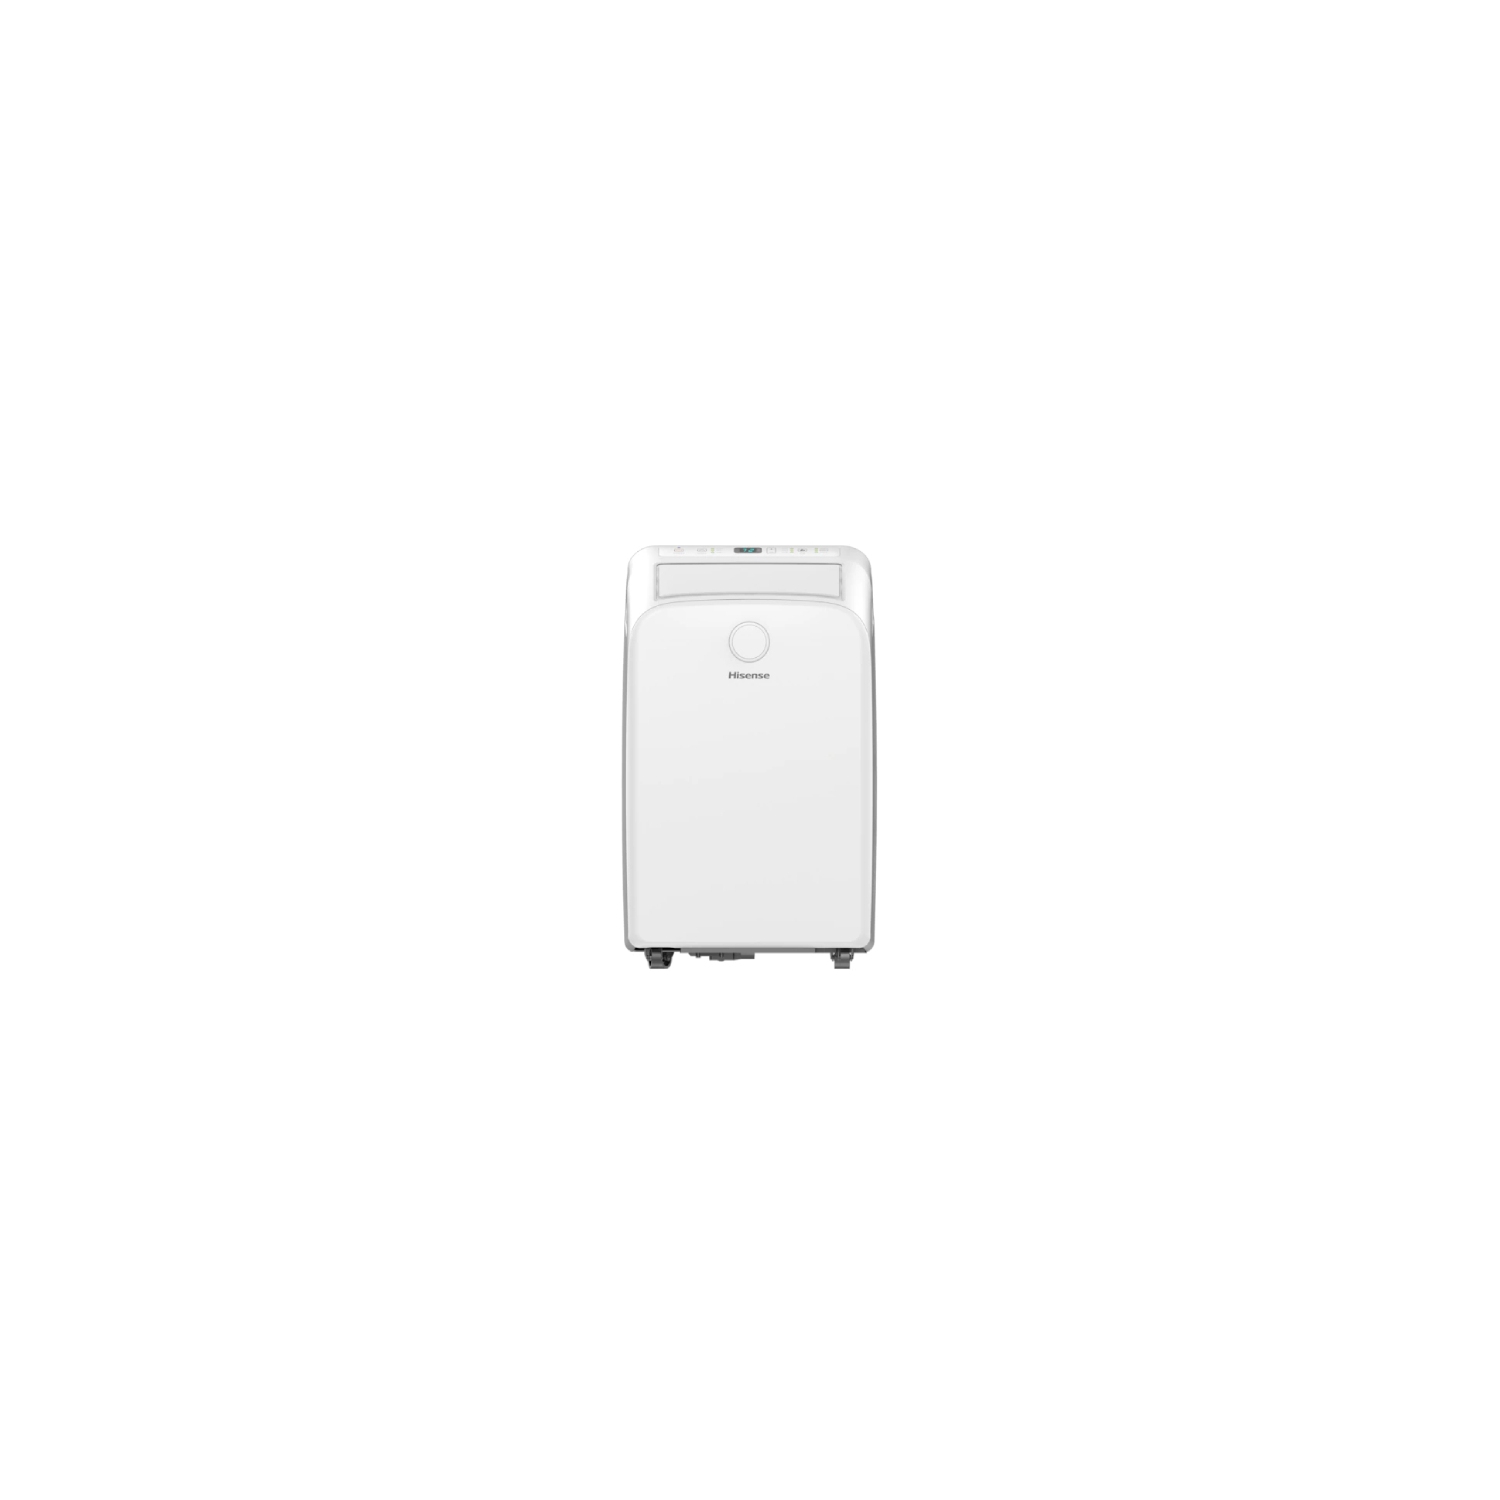 Refurbished (Excellent) - Hisense AP1219CR1W 12,000 BTU (ASHRAE) 7,500 (DOE) Covers Up to 400 Sq Ft 3-in-1 Portable Air Conditioner - White - Certified Refurbished